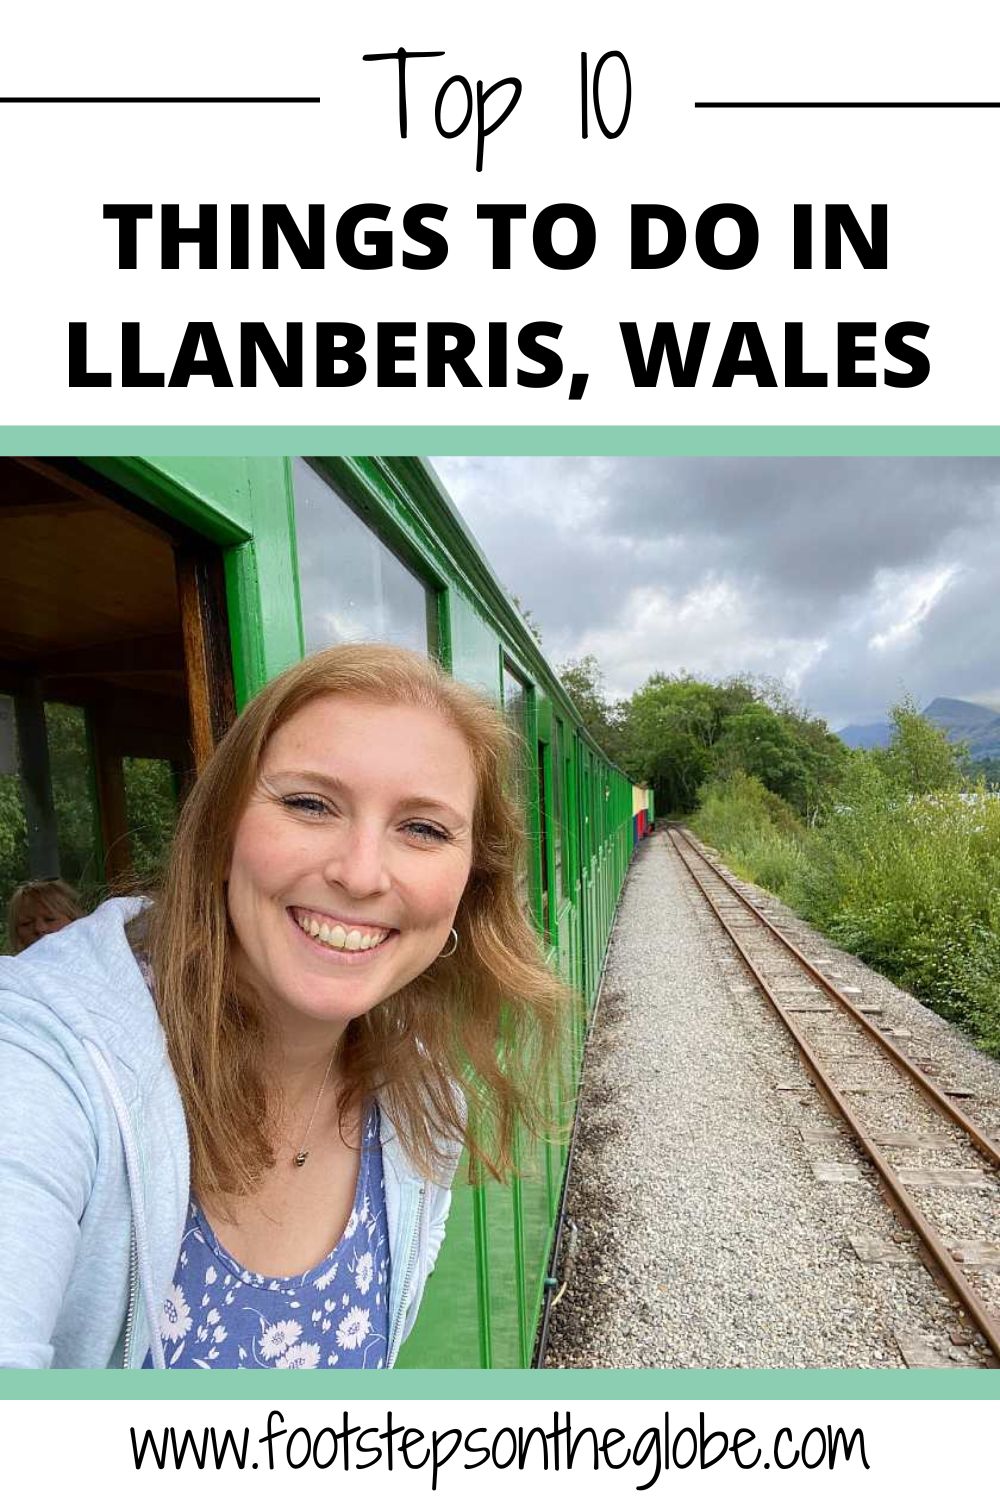 Mel looking out from a green steam train window pinterest image with the title: "Top 10 things to do in Llanberis, Wales"